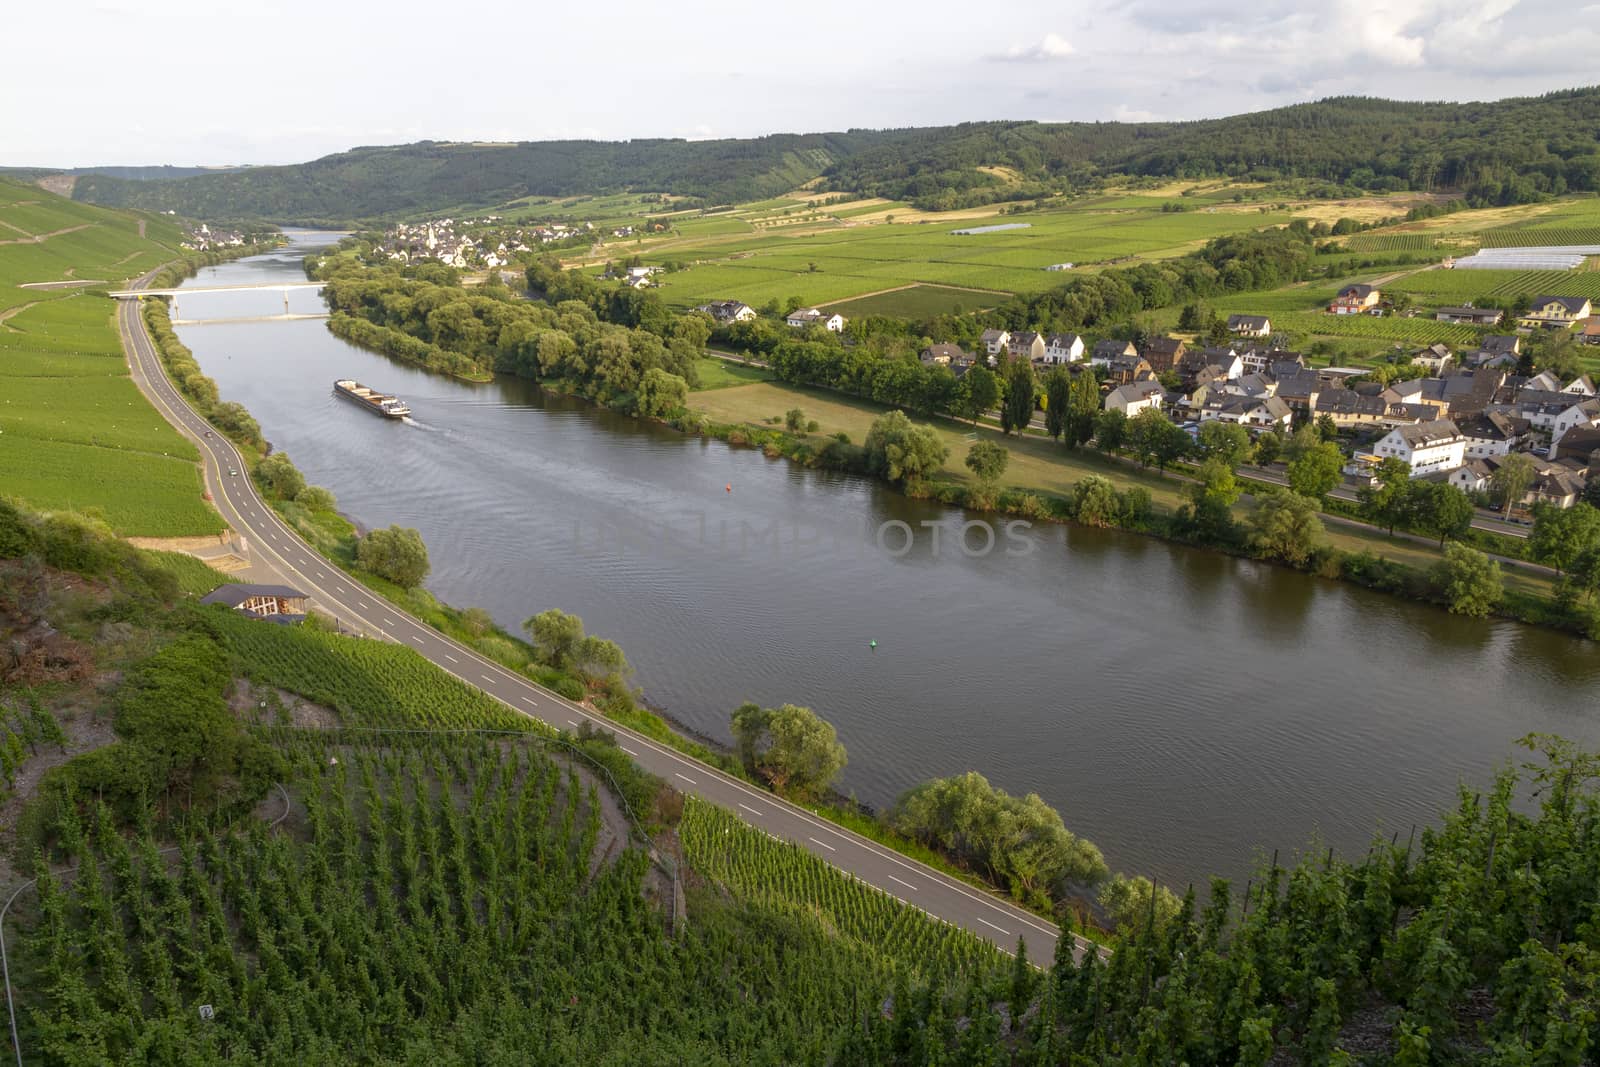 Bernkastel Kues and vineyards aerial panoramic view. Bernkastel-Kues is a well known winegrowing centre on the Moselle river, Germany. - Image